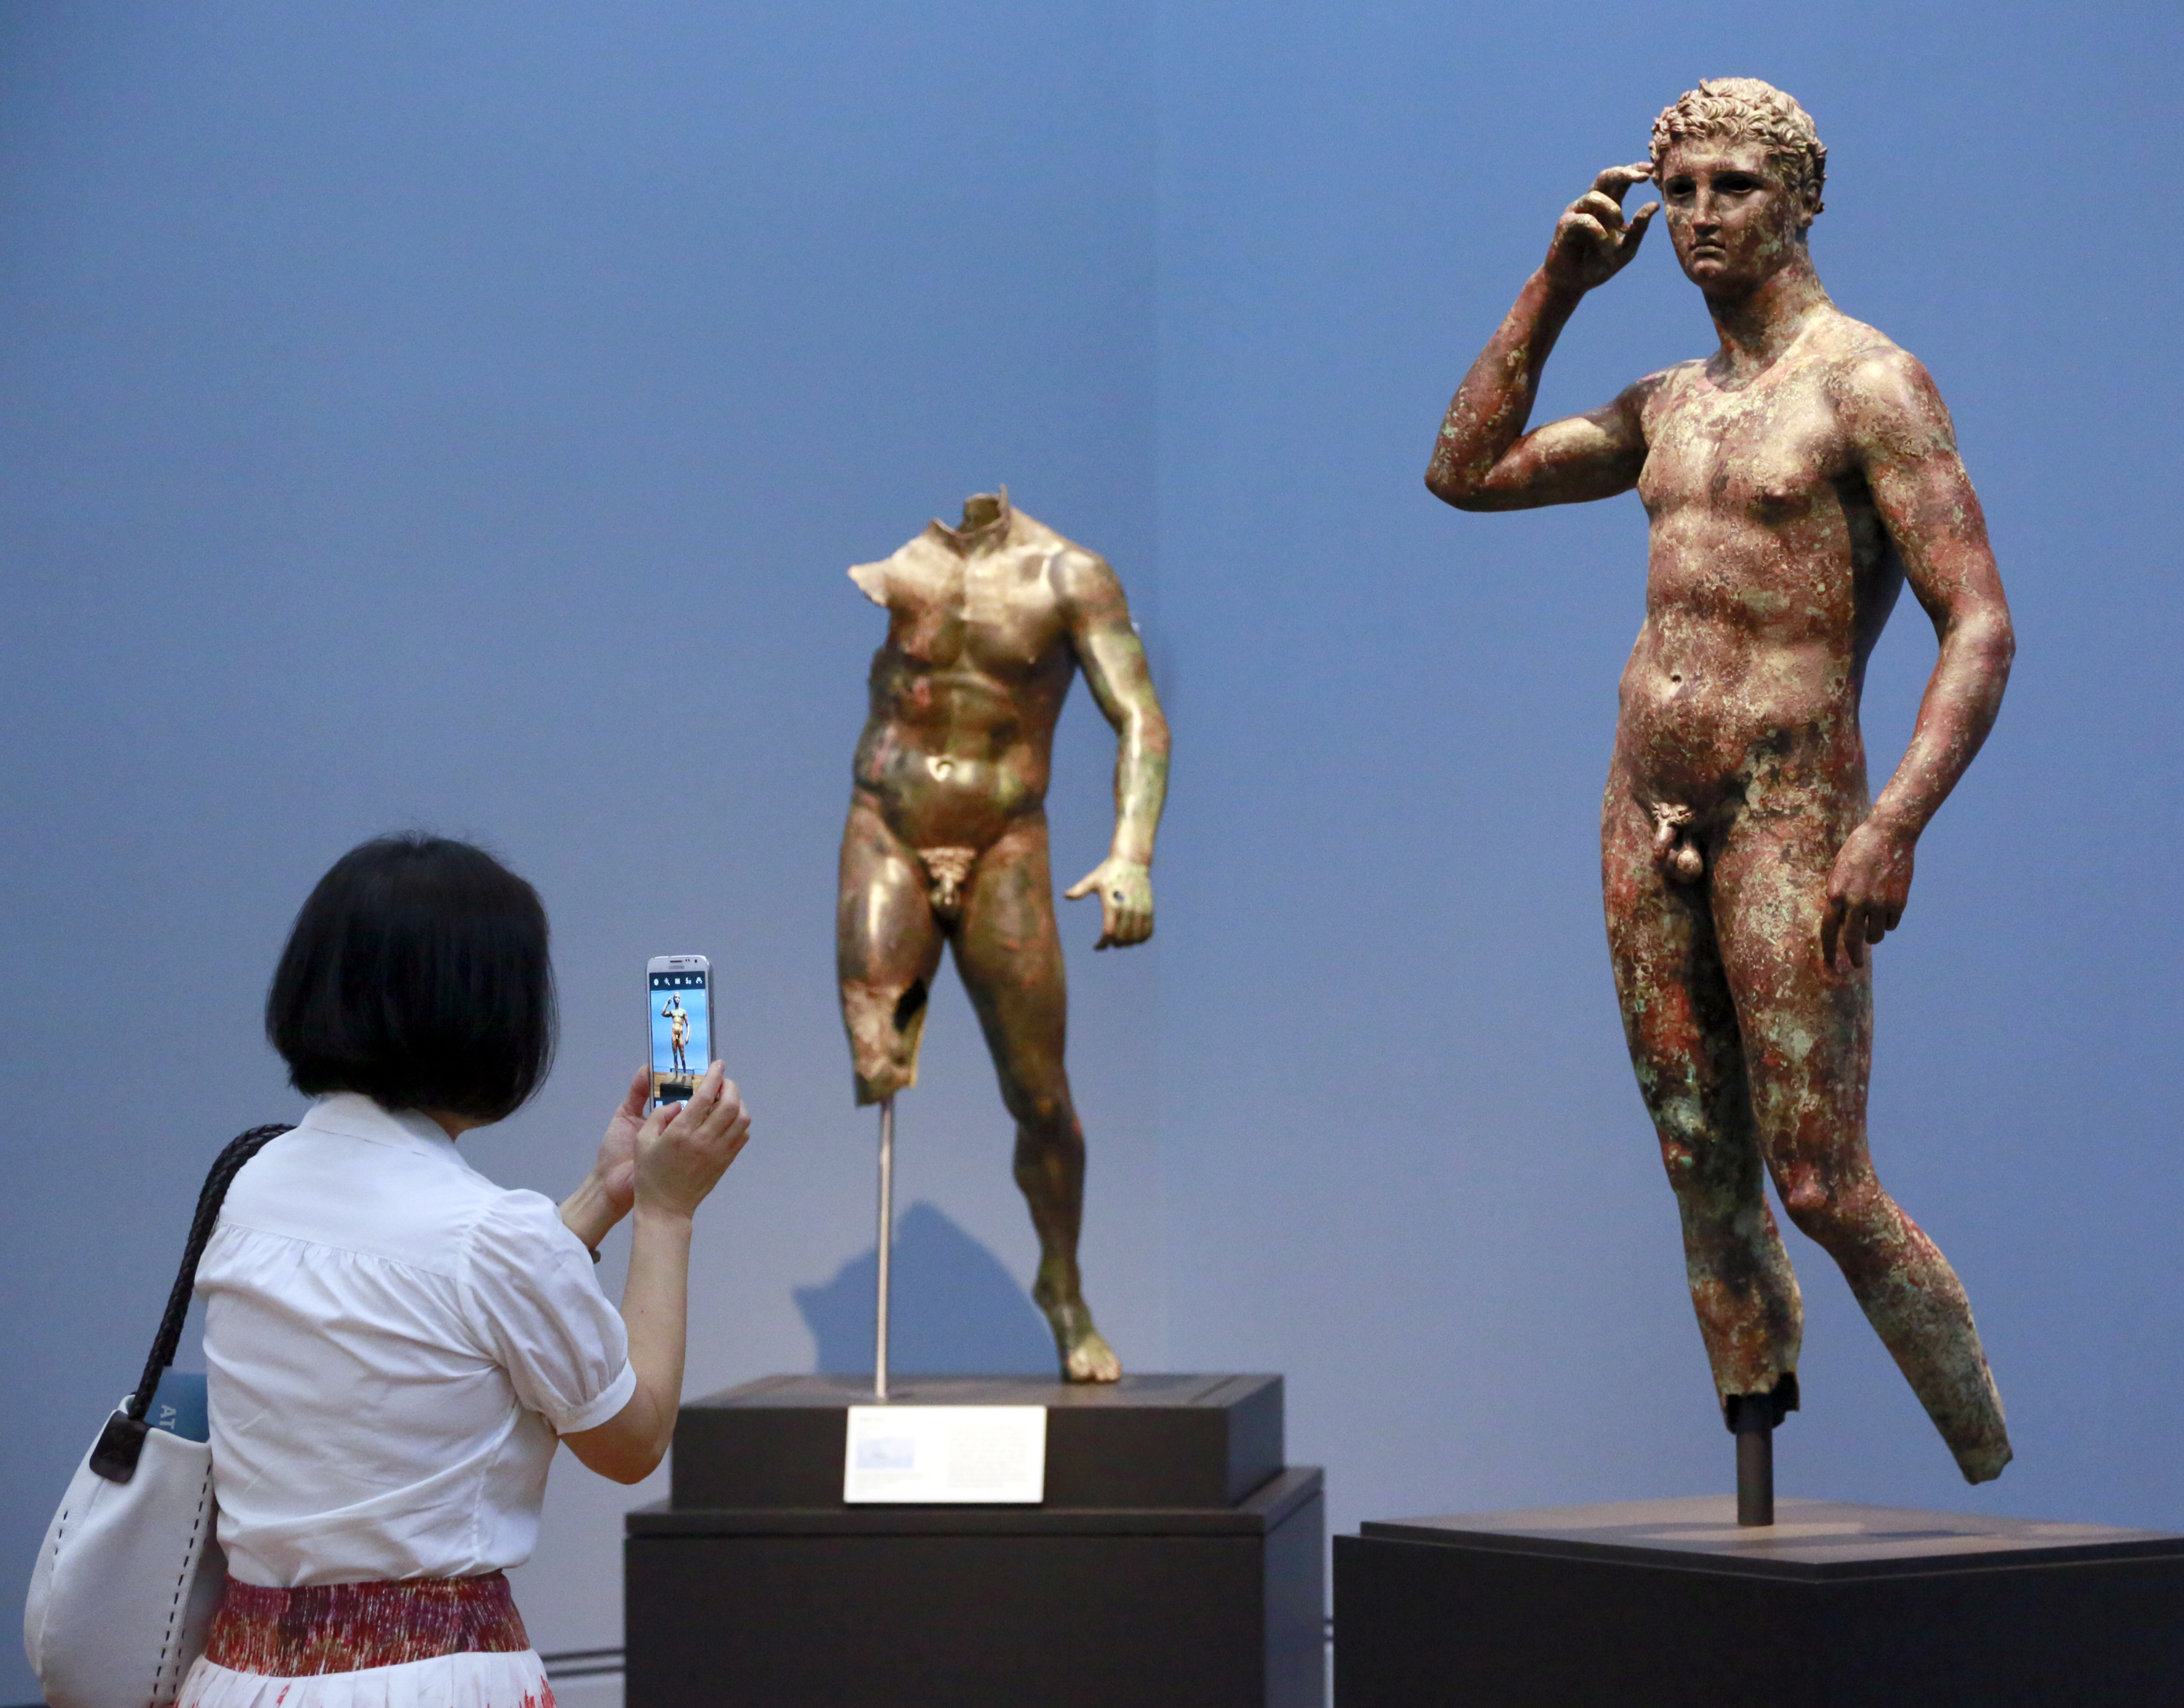 European court upholds Italy’s right to seize prized Greek bronze from Getty...